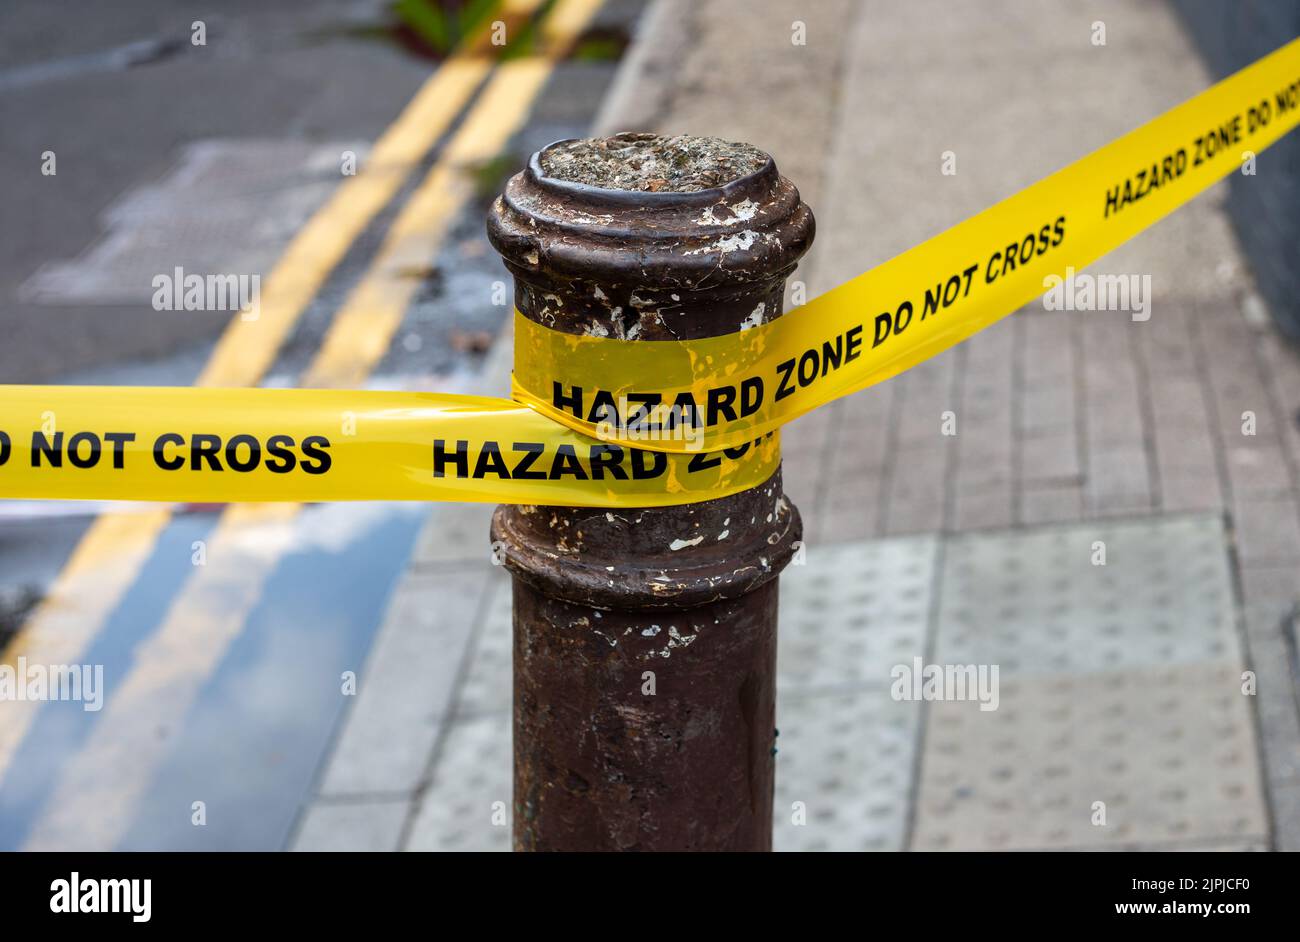 Safety and hazard yellow tape Stock Photo